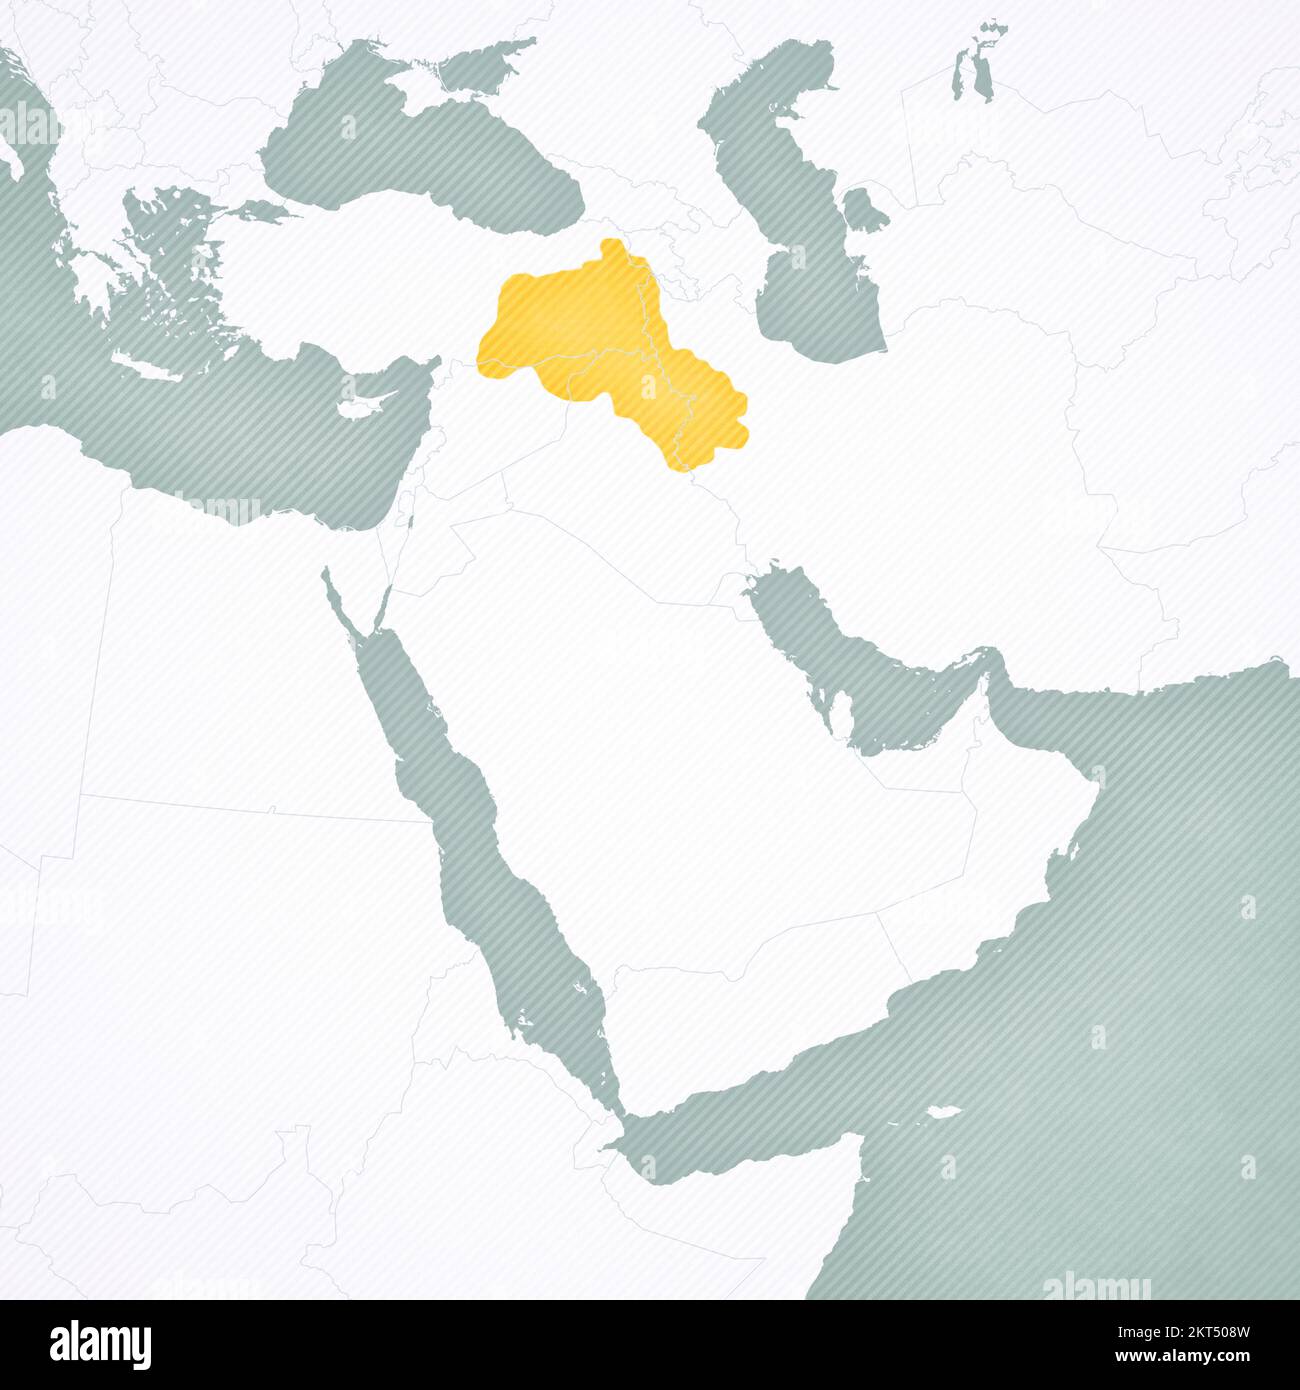 Kurdistan on the map of Middle East (Western Asia) with softly striped vintage background. Stock Photo